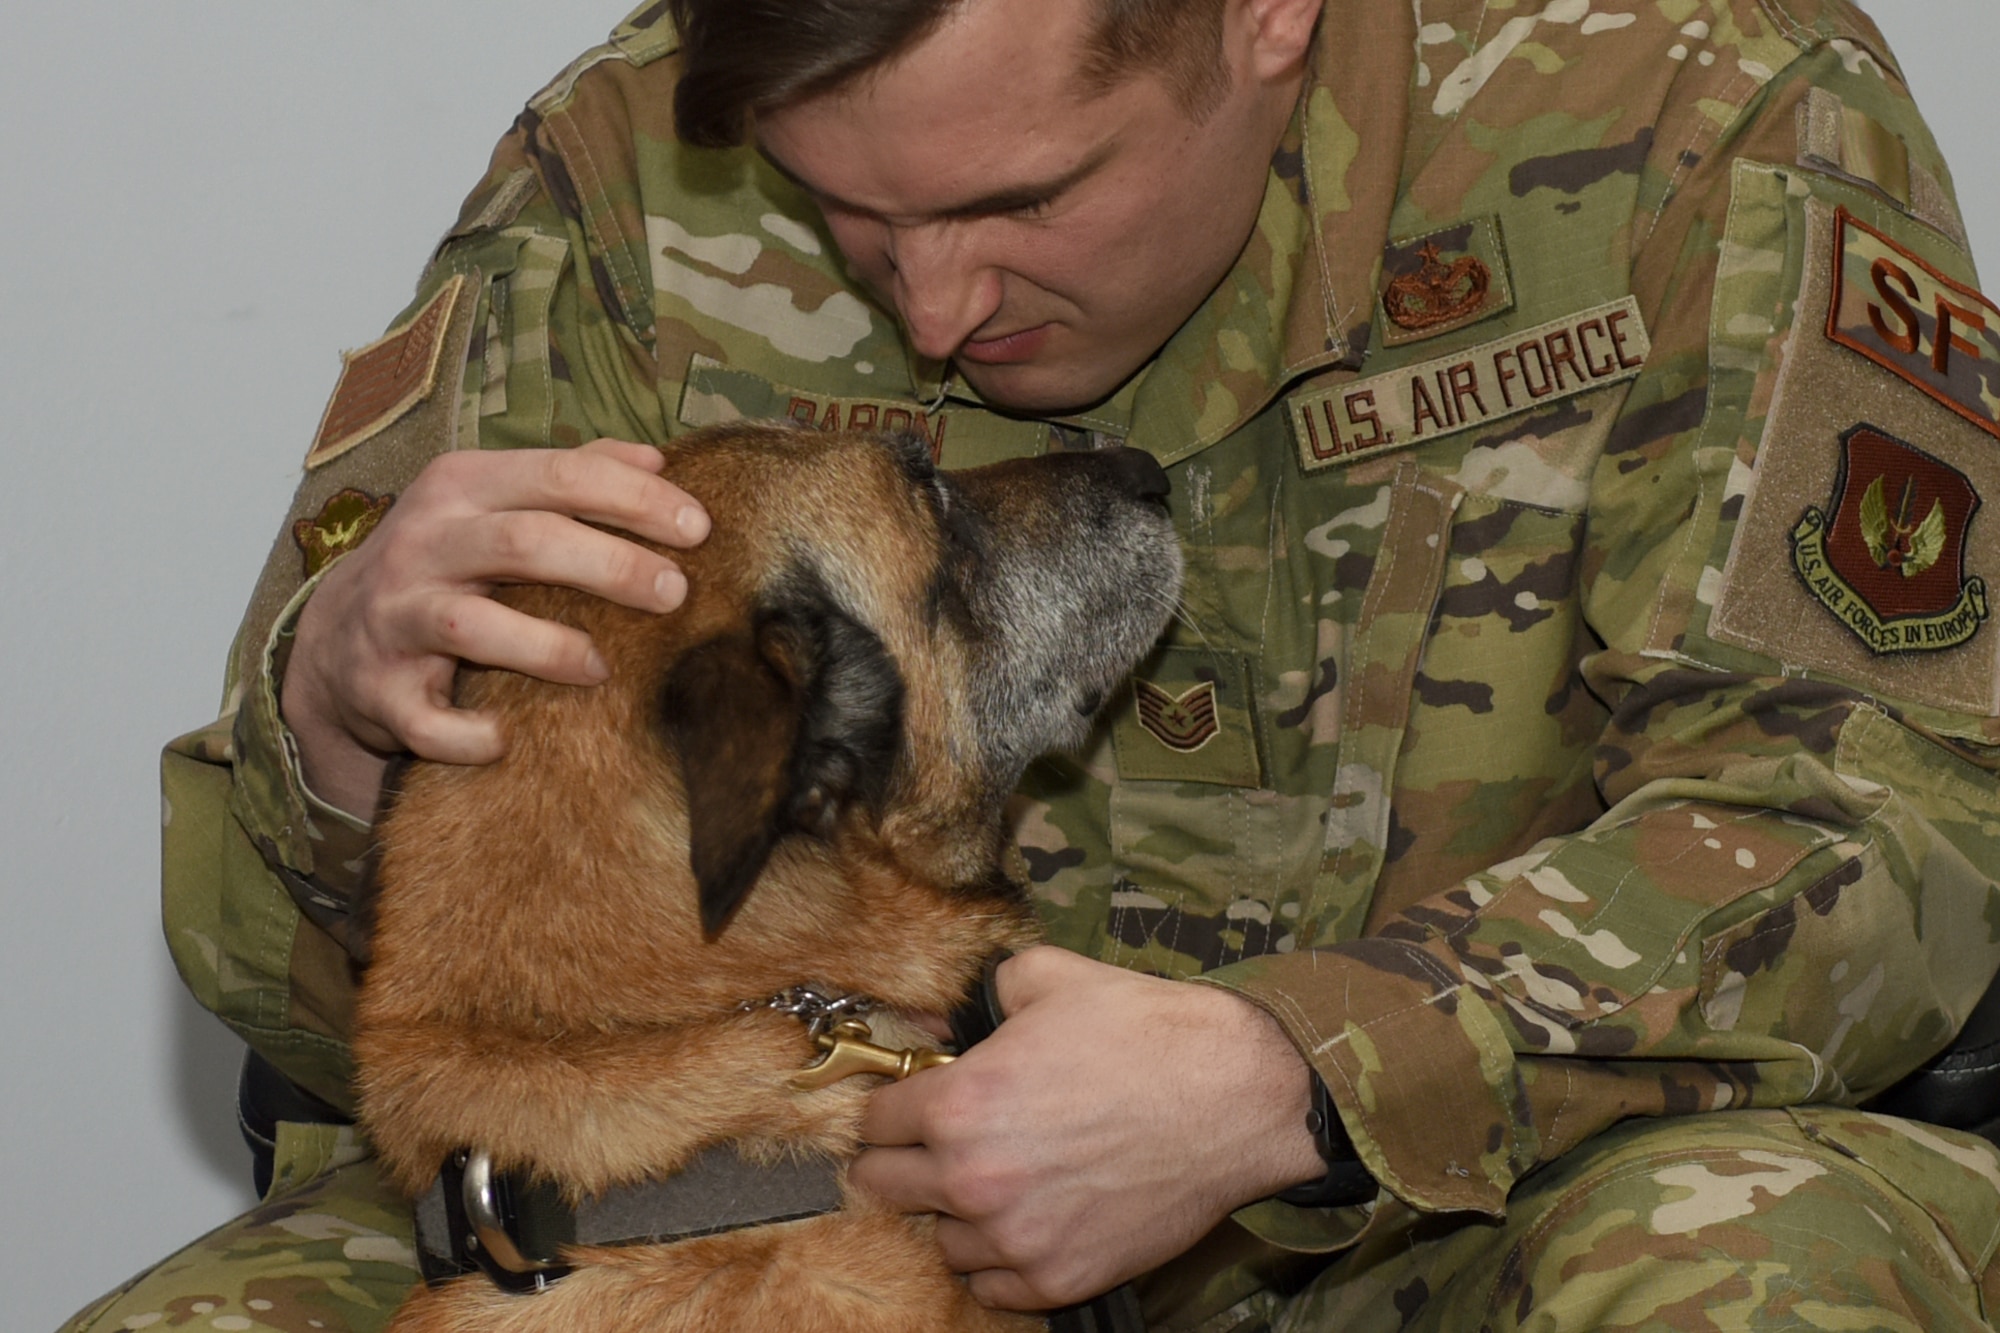 Tech. Sgt. Alexander Baron, a 48th Security Forces Squadron military working dog handler, shows some love to his K9 companion, YYogi, a 48th SFS MWD, during the dog’s retirement ceremony at Royal Air Force Lakenheath, England, Jan 30, 2020. During his service, YYogi completed over 20 survival, evasion, resistance and escape opposing forces exercises helping over 400 Aircrew earn their Code of Conduct Continuation Training making sure they were combat mission ready. (U.S Air Force photo by Airman 1st Class Jessi Monte)